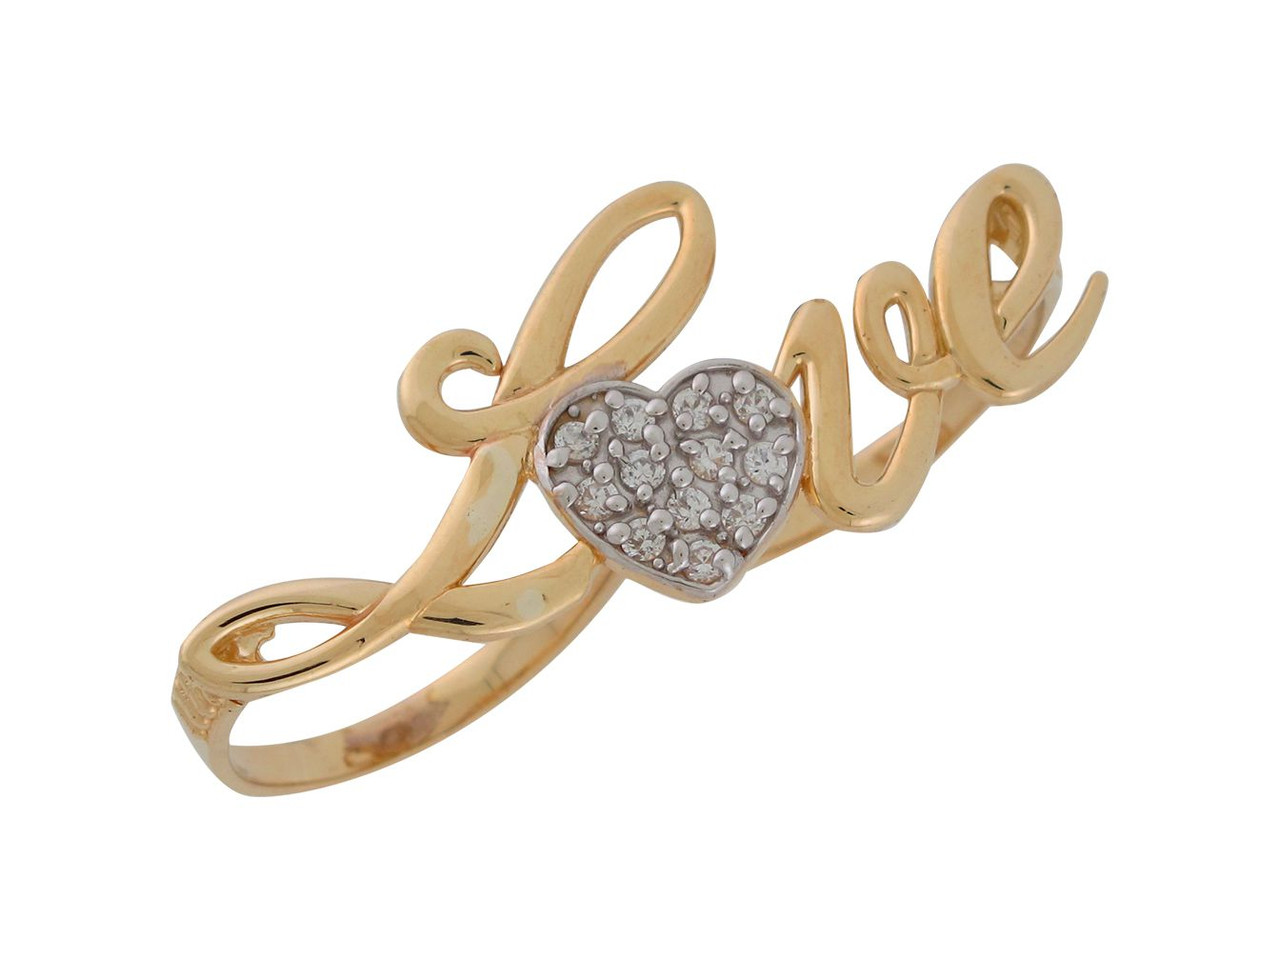 Polish Studded Two Finger Jewelry Ladies Love - Gold (JL# R9325) Ring Liquidation Two-Tone High